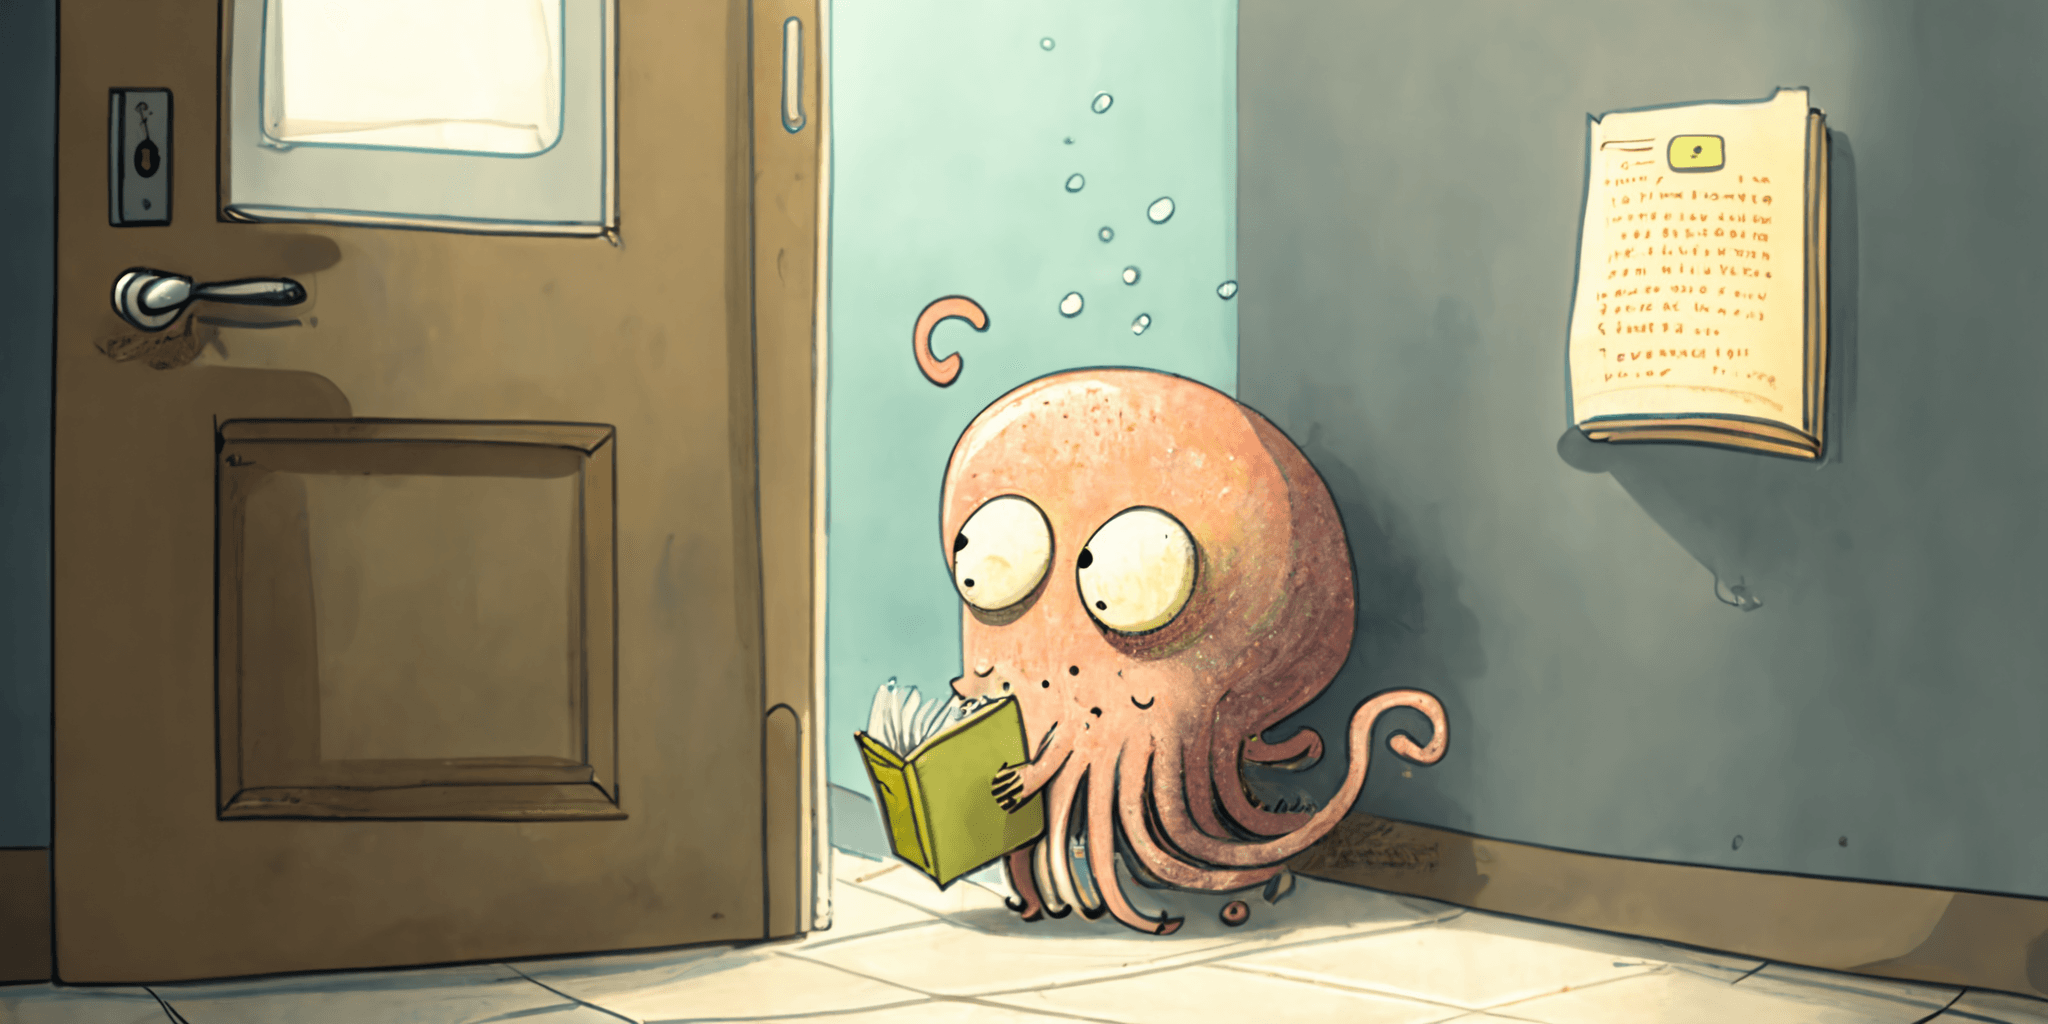 A digital illustration featuring an adorable pink octopus reading a green book next to a wooden door. The octopus is engrossed in its reading, with bubbles emanating from its head. A pinned note is seen on the wall nearby.